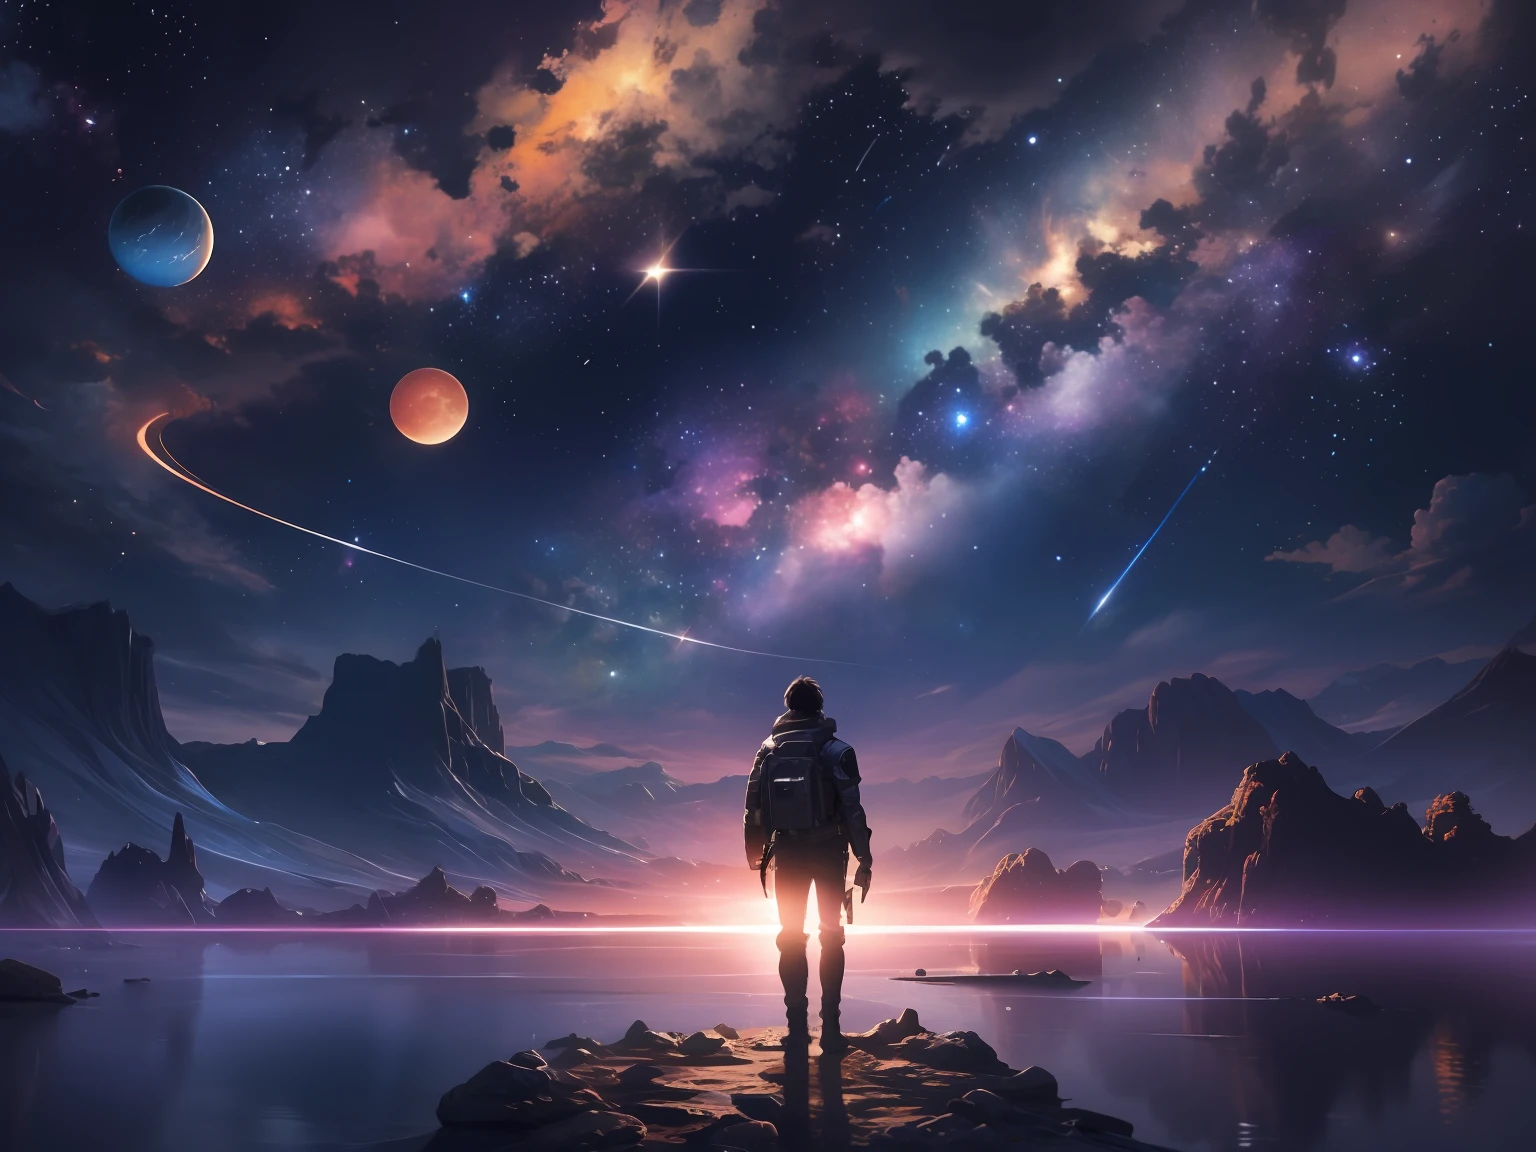 a man in armor on a rock looking at the stars in the sky, endless cosmos in the background, looking out into the cosmos, highly detailed digital art in 4k, lost in the milky void, paper awesome wallpaper, Artgem e Beeple Masterpiece, 8k stunning artwork, 8k hd wallpaper digital art, lost in the immensity of space, Some planets, black hole